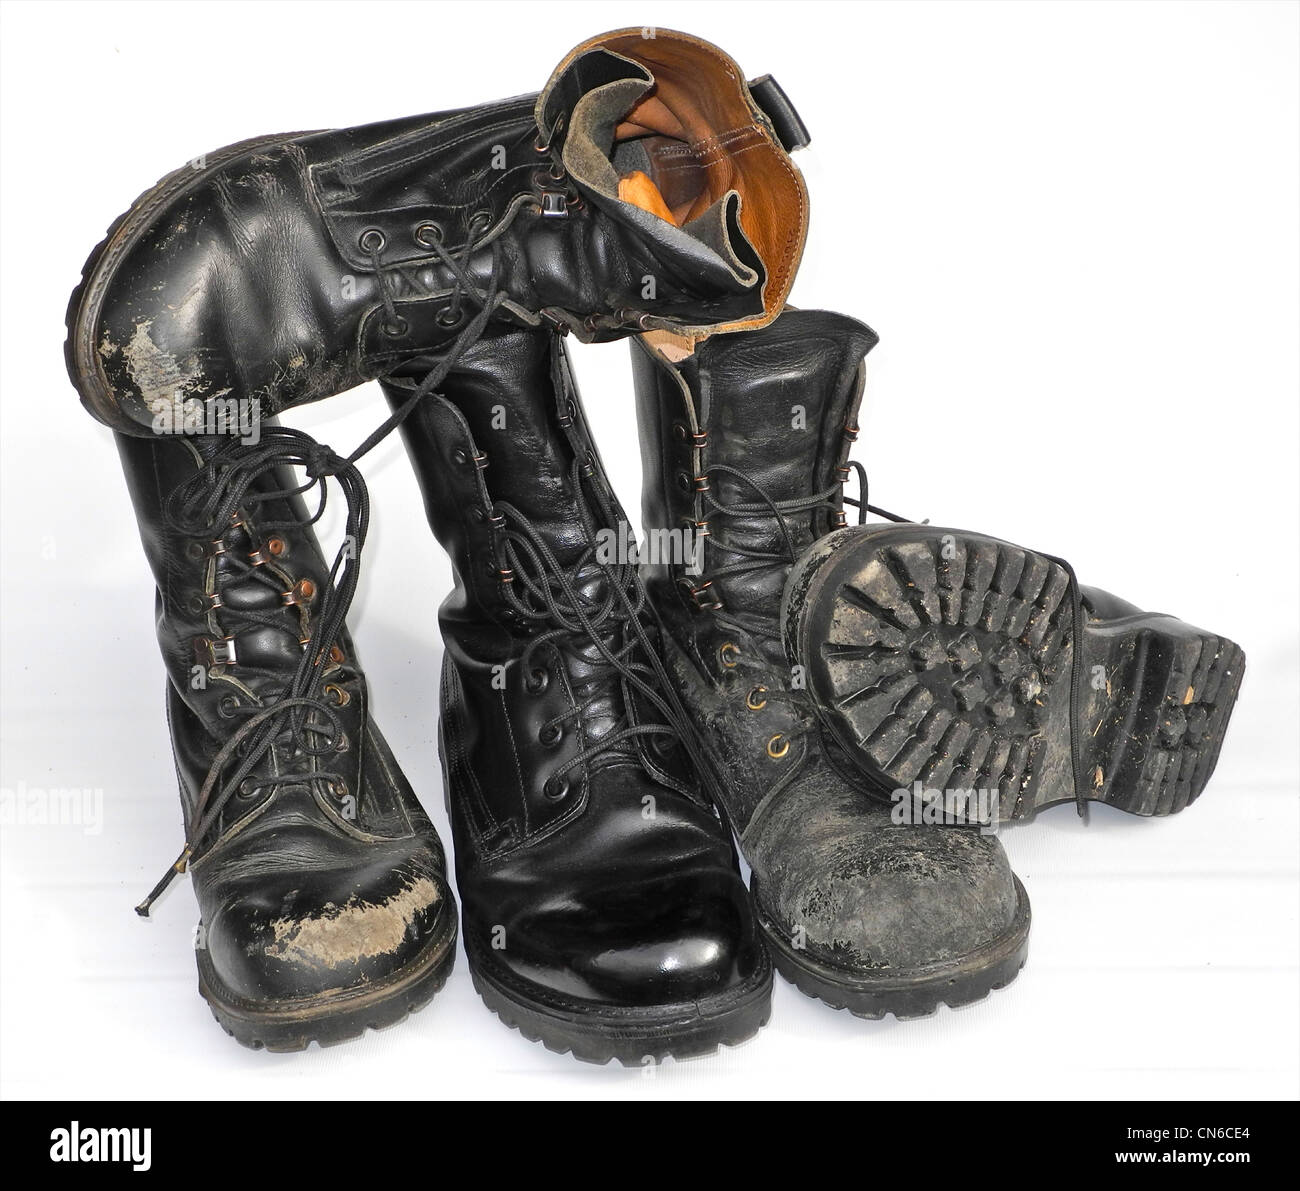 Old Army Boots High Resolution Stock Photography and Images - Alamy